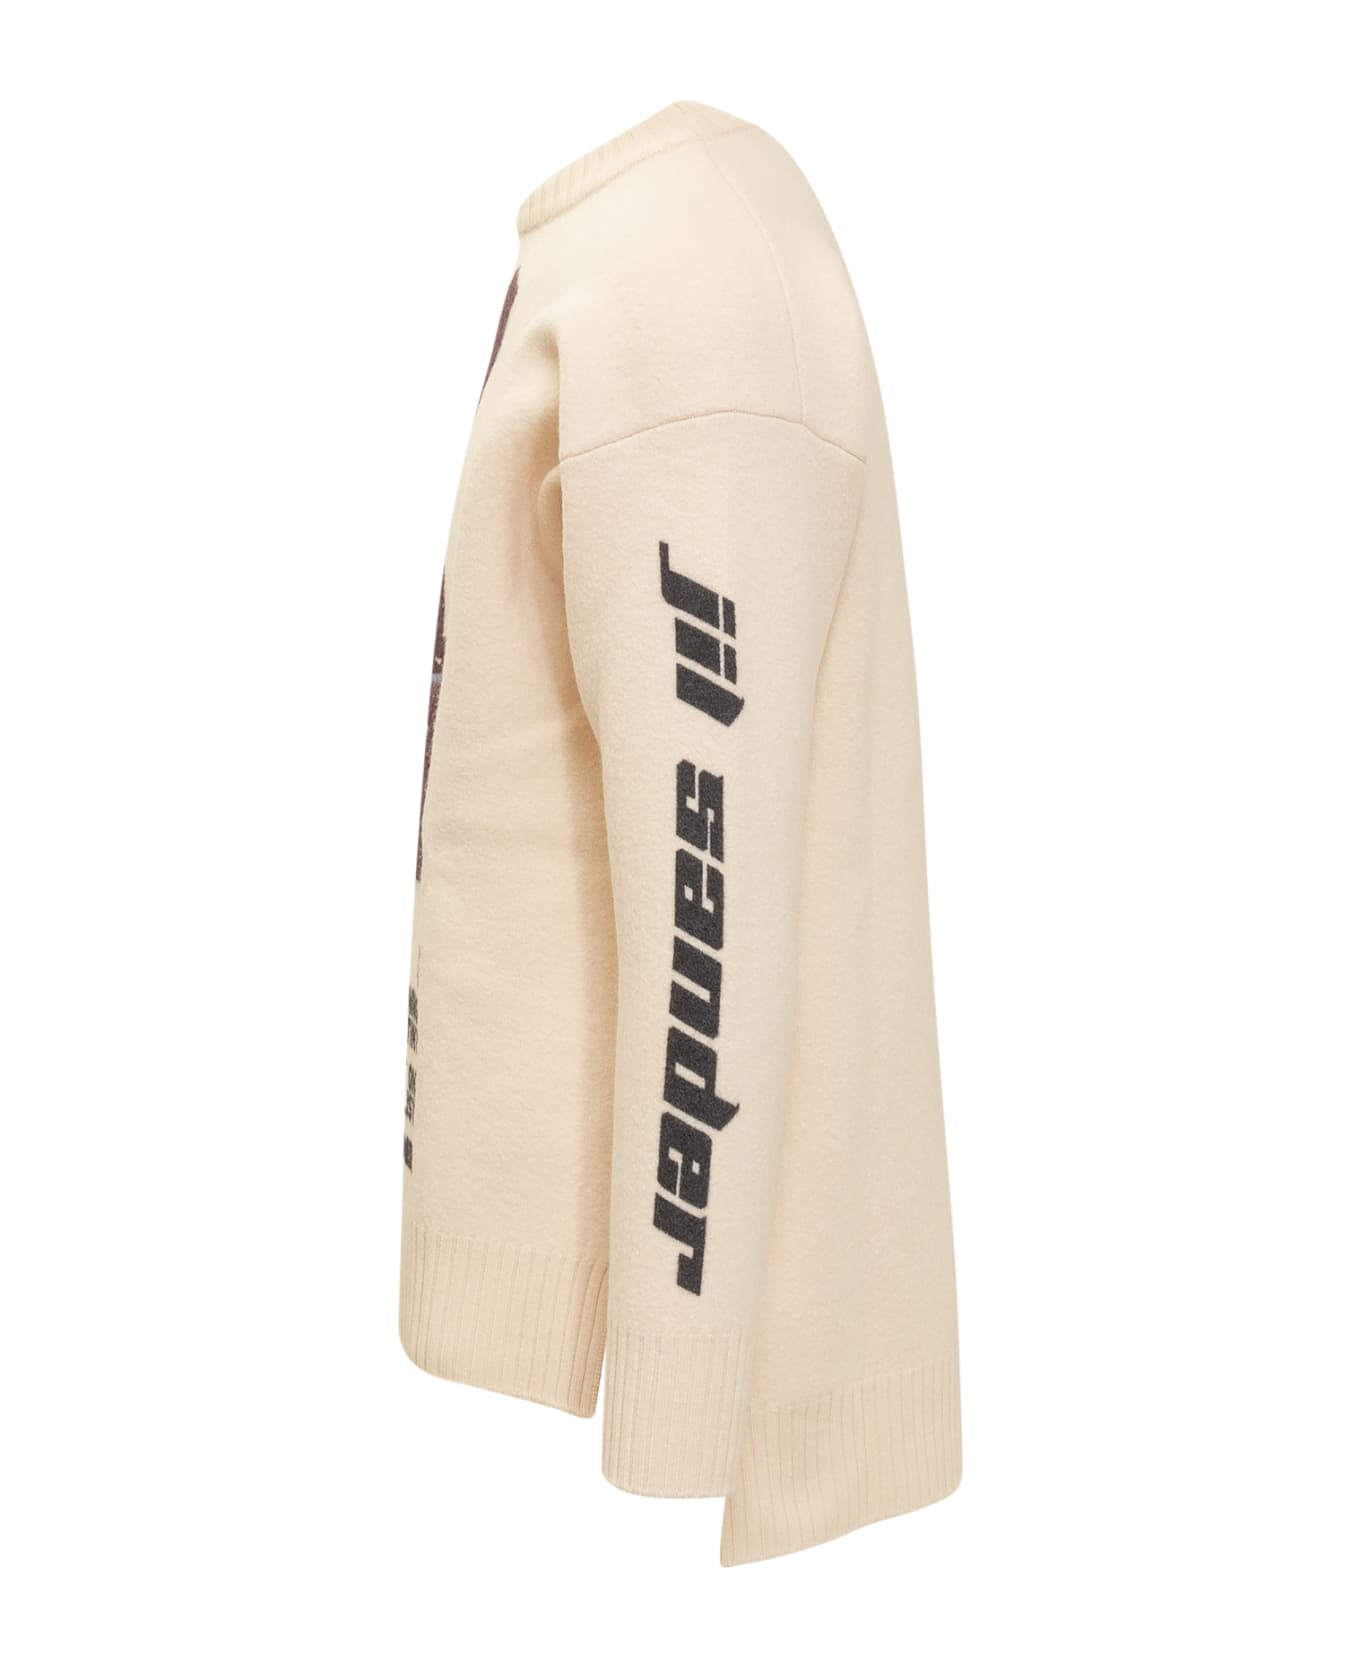 Jil Sander Jersey With Embroidery - BURRO